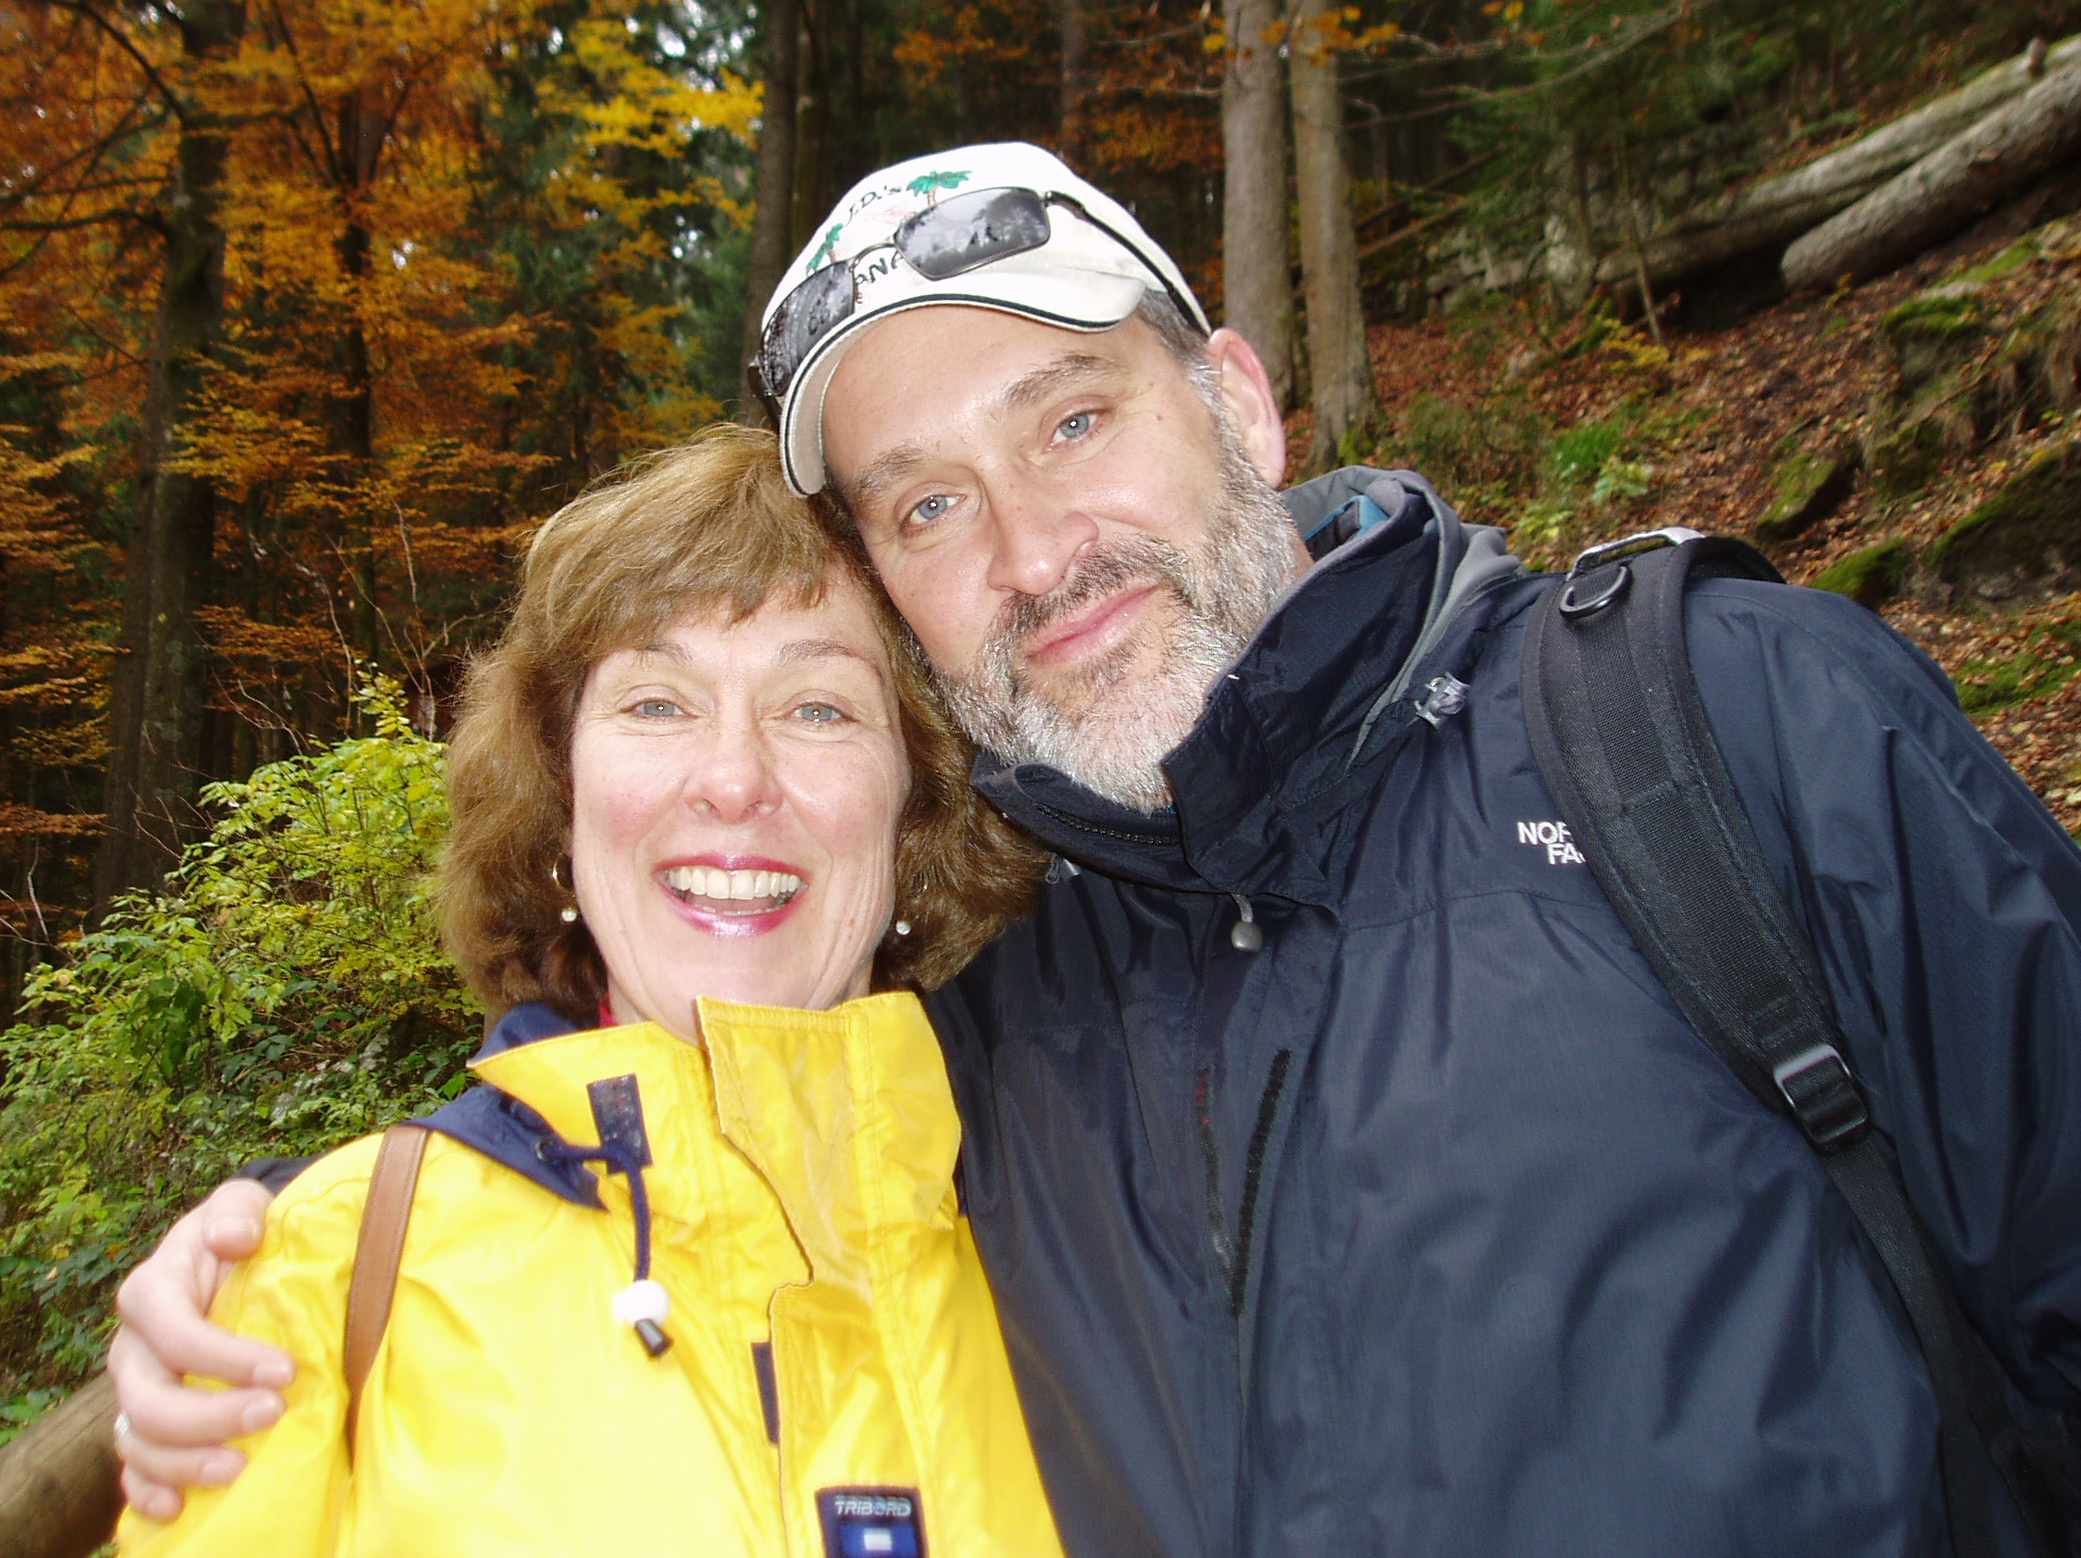 Bruce and his sister Beth Durand in the Black Forest of Germany, 2009